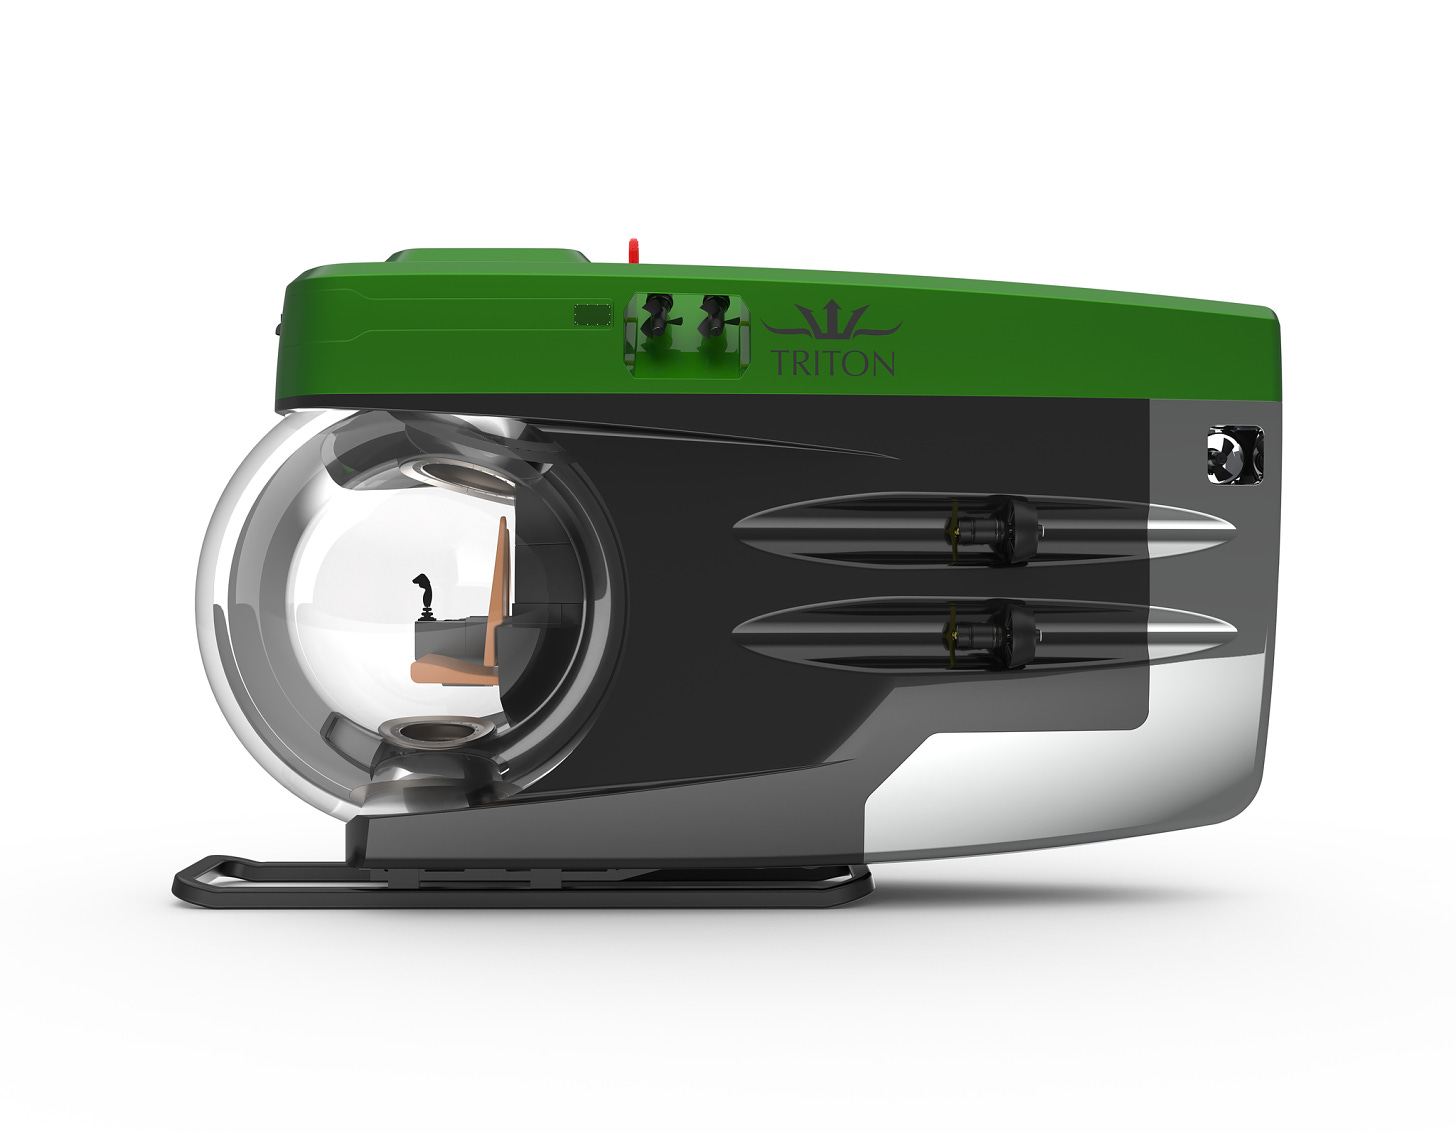 An undersea ship that is kind of rectangular with a big glass ball on one end. The top is green and the rest is black. It's kind of stapler/staple-puller shaped.